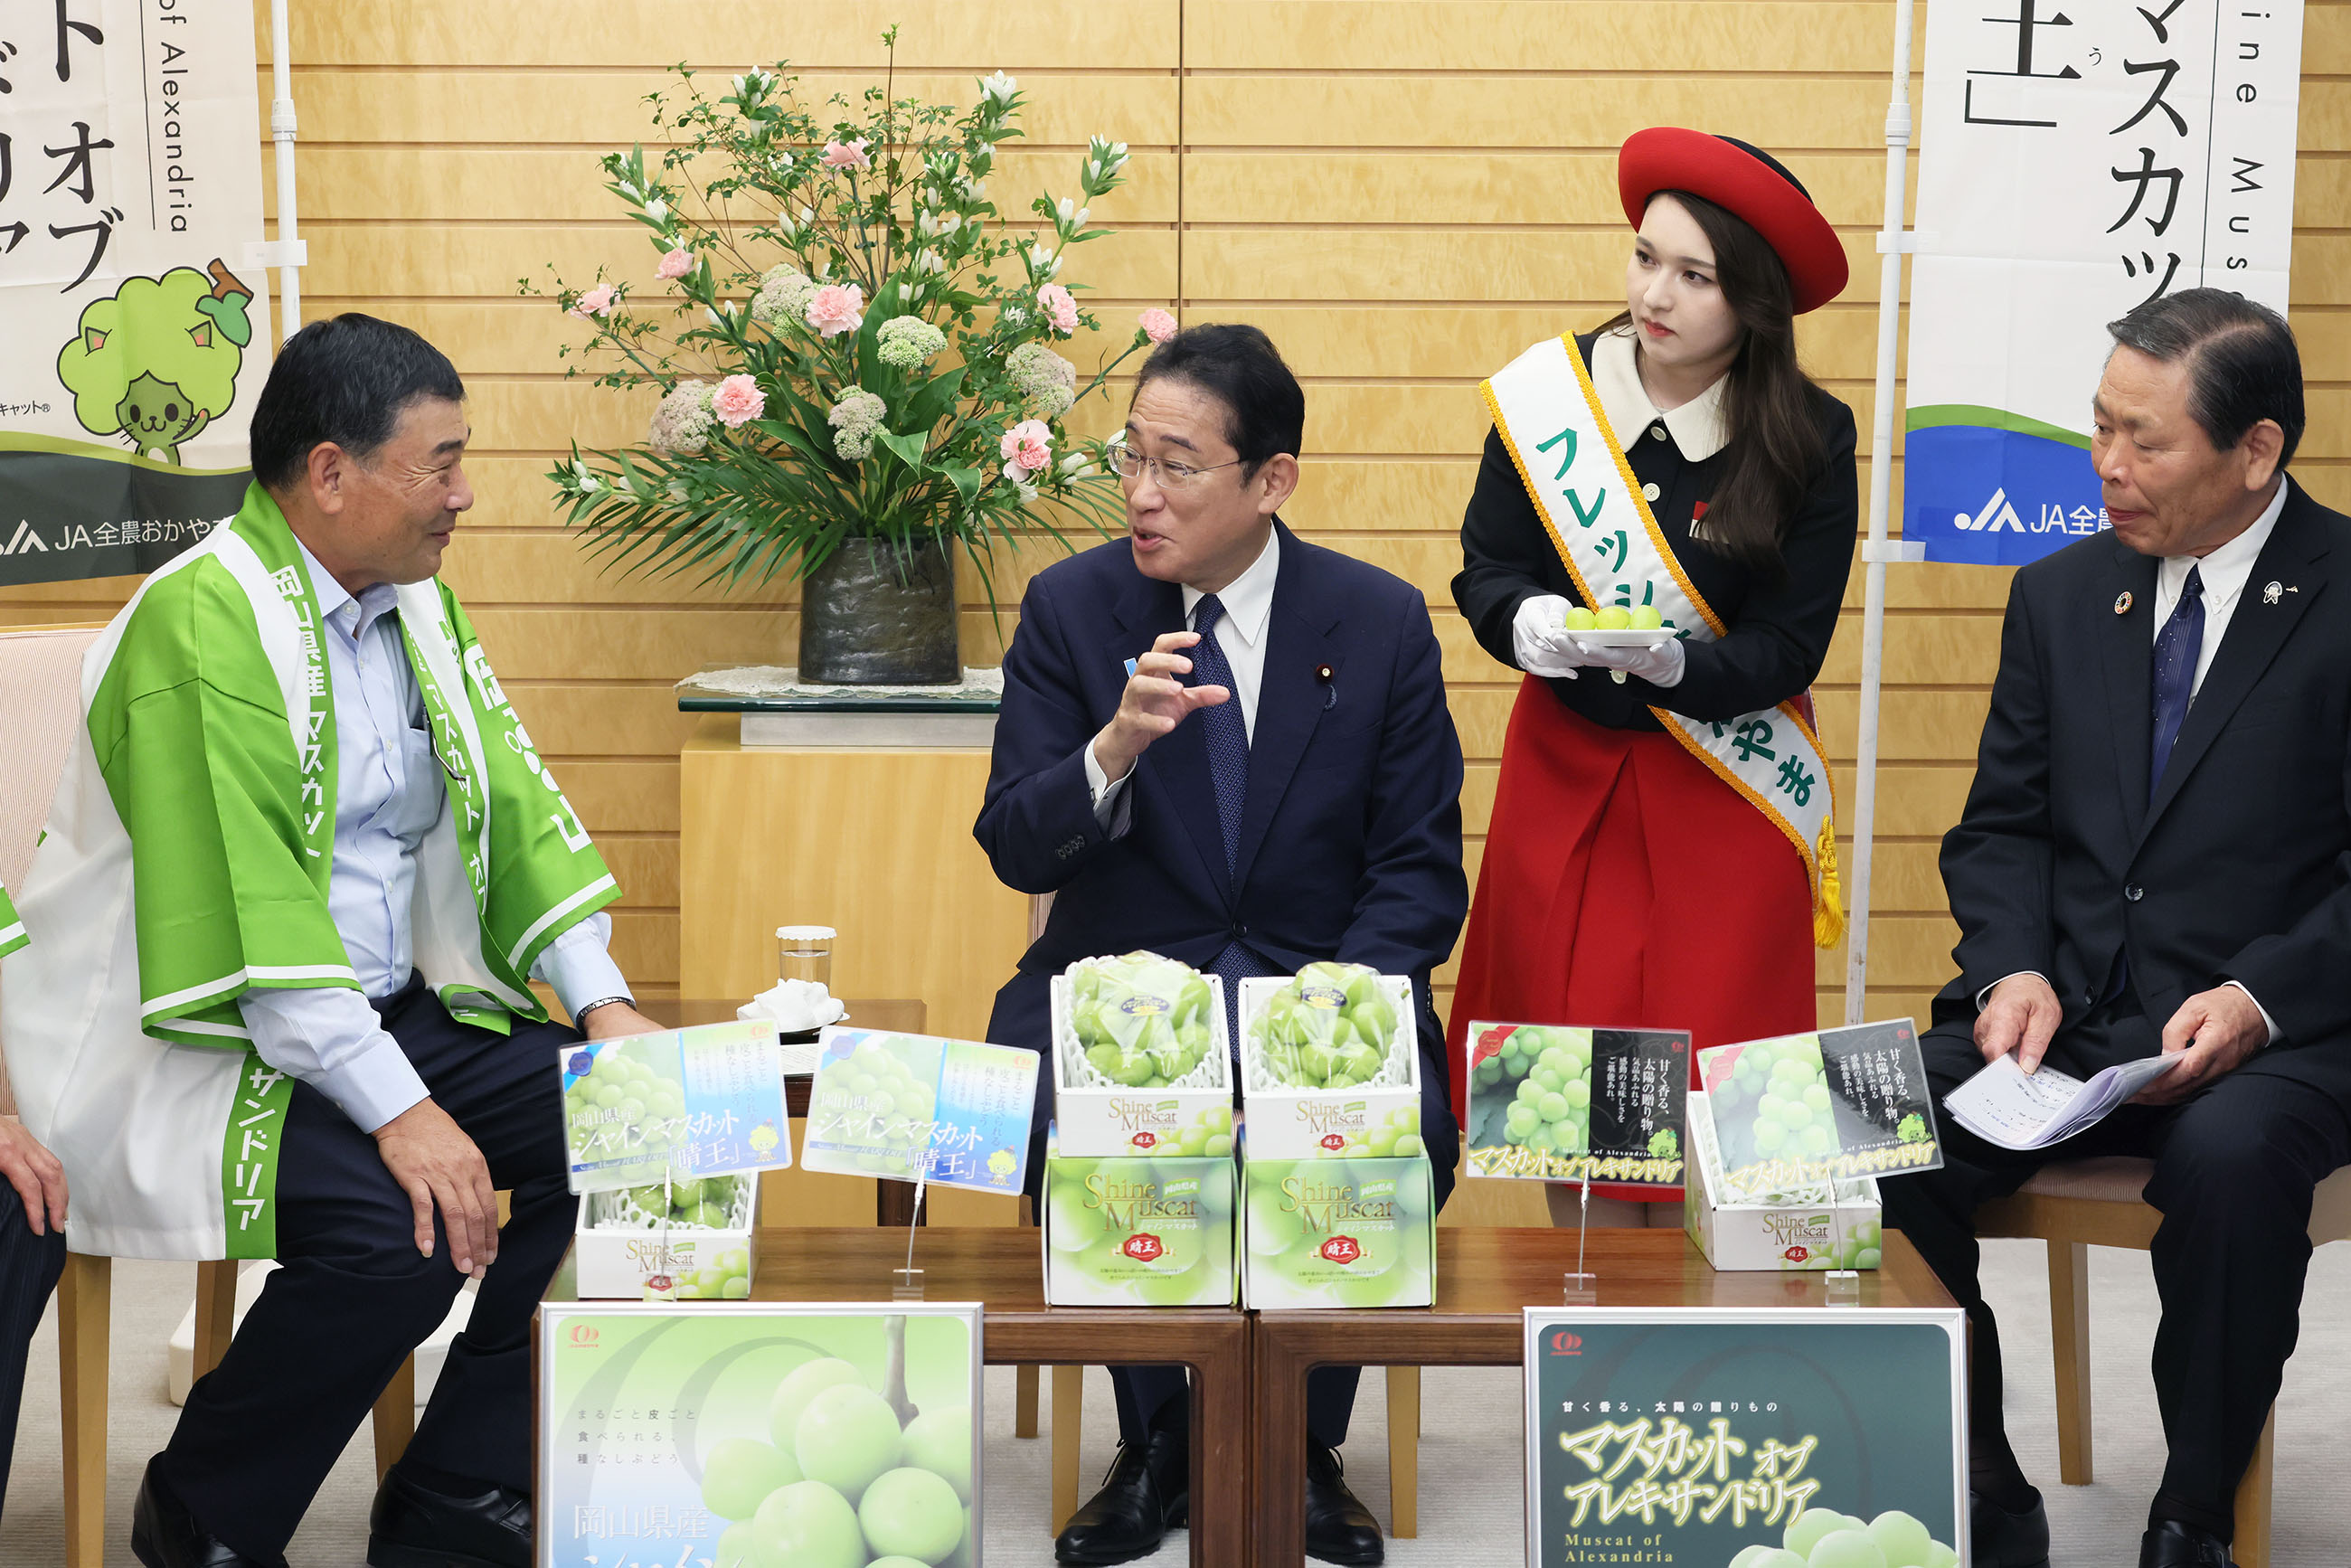 Prime Minister Kishida being presented with Shine Muscat grapes (4)